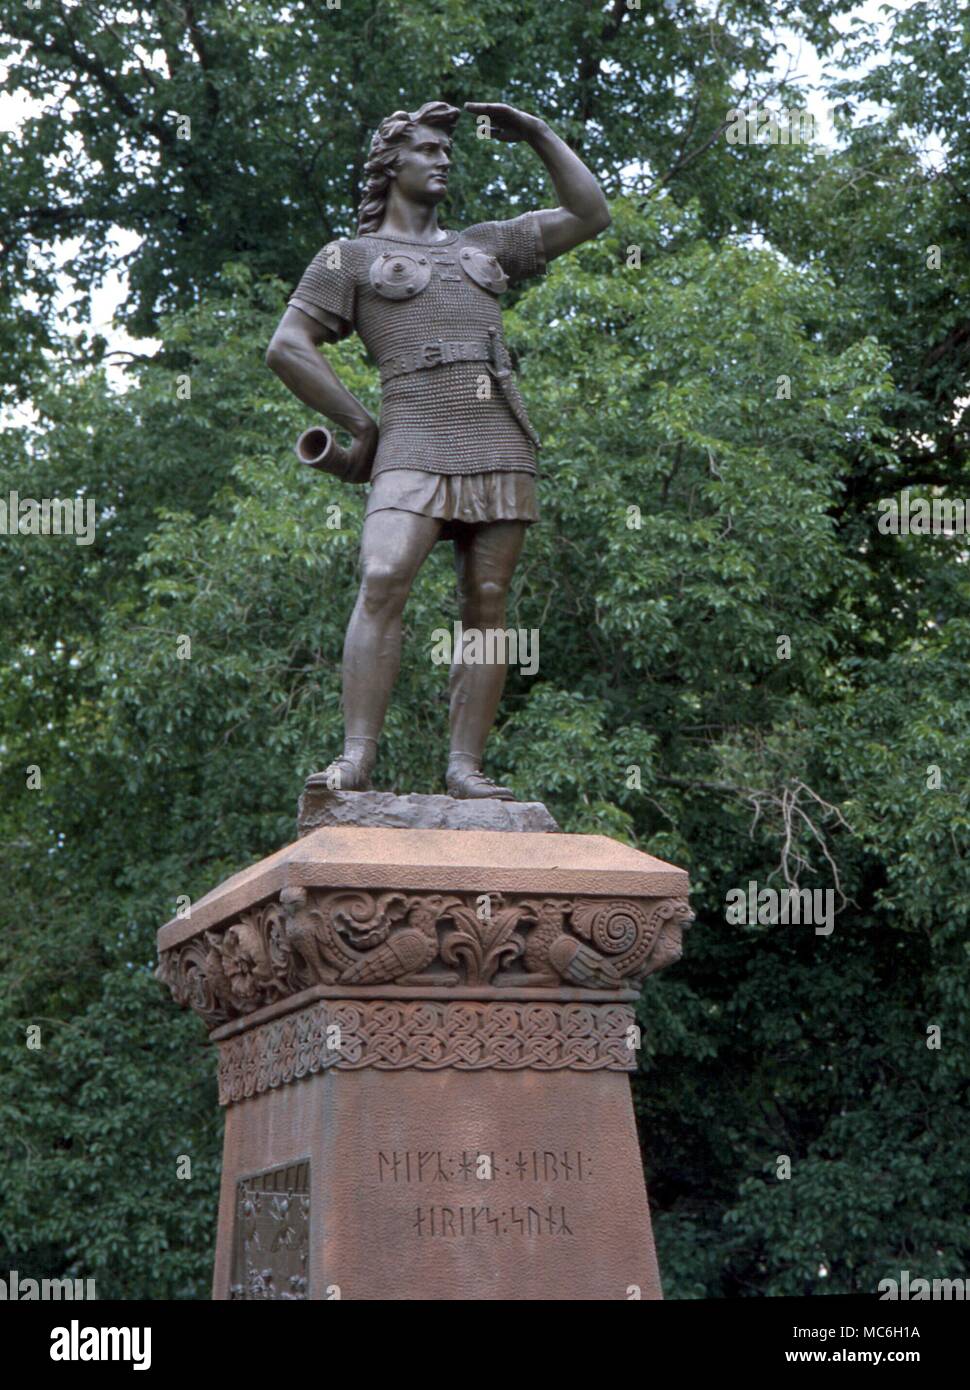 Statue of Leif Ericson, who landed in America circa AD 1000. In Commonwealth Avenue, Boston. On the socle, his names set out in ancient runes Stock Photo